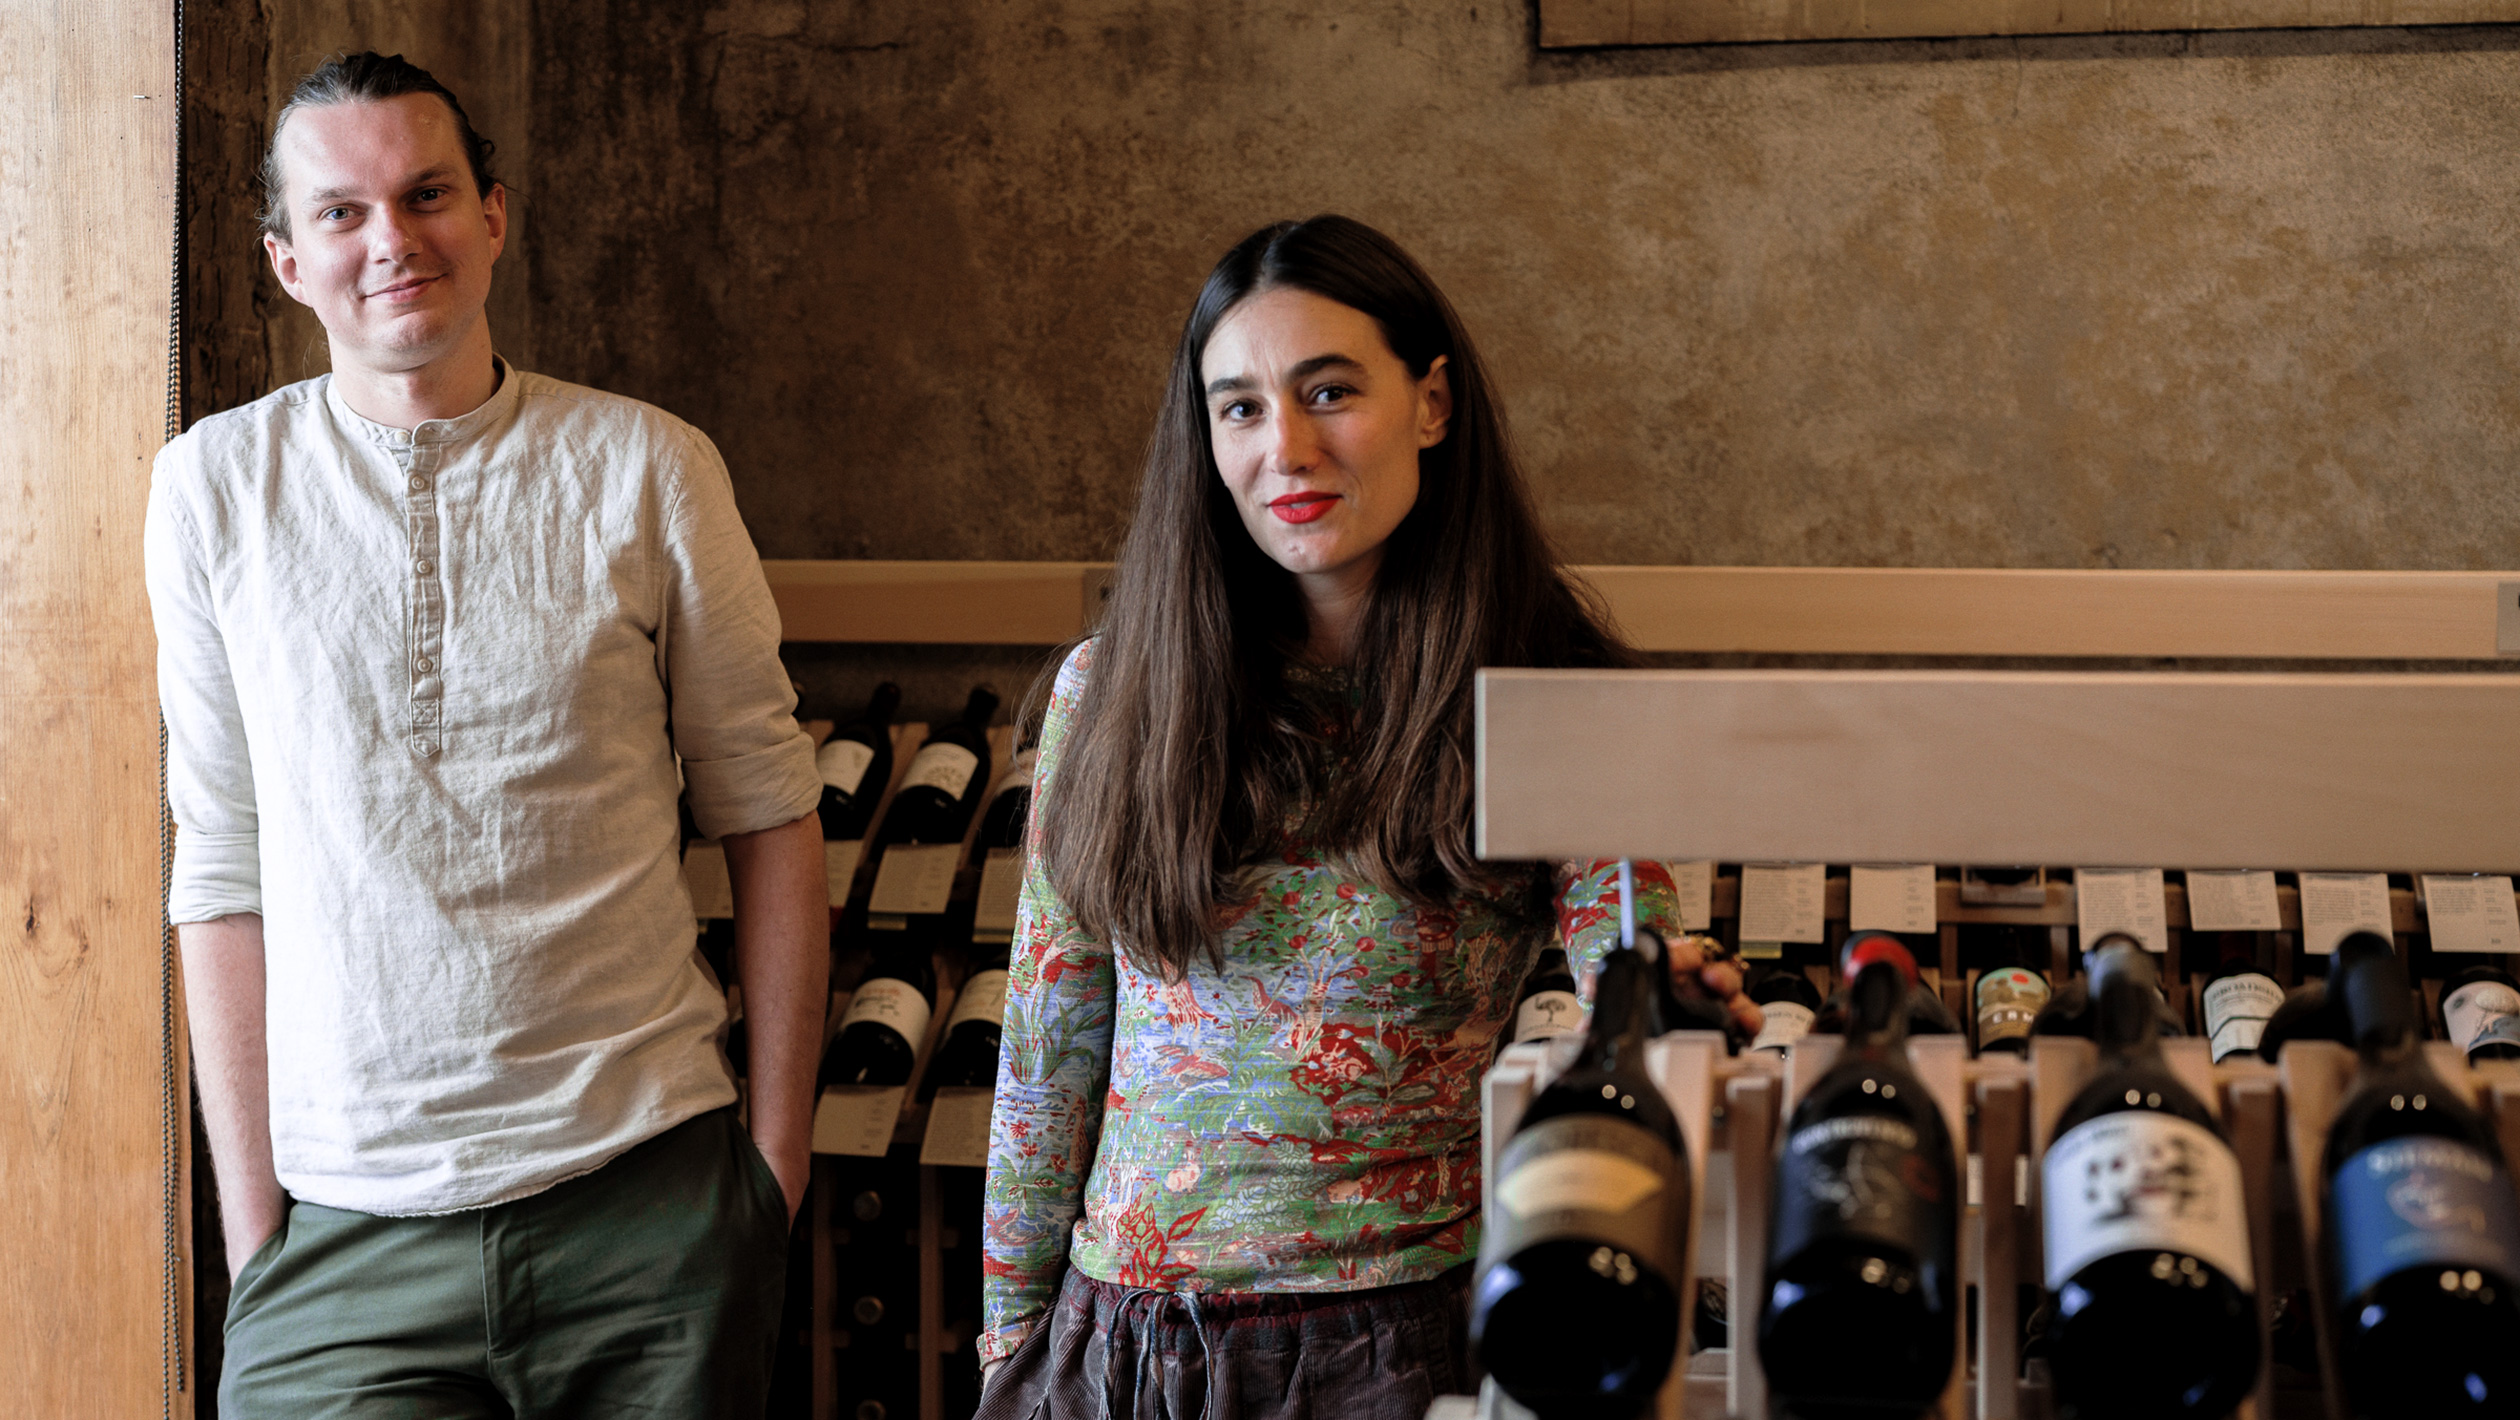 Jonas Andersen and Natalie Marie Gehrels, co-owners of Folkways, pose in their shop in front of shelves of wine